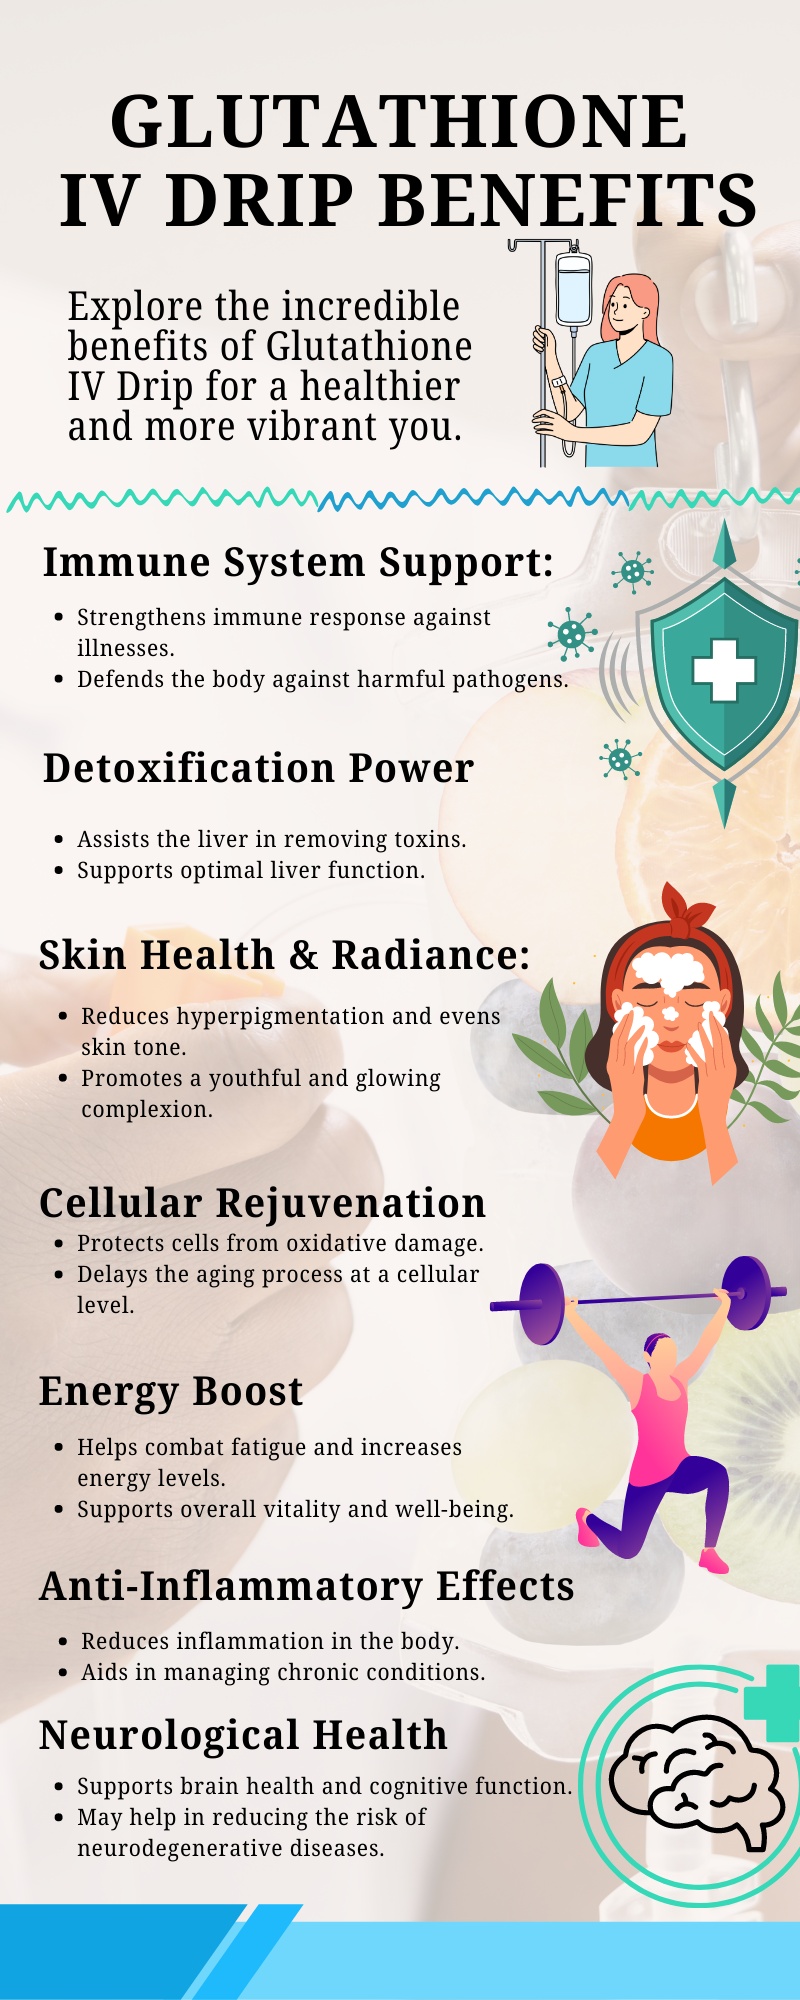 xplore the incredible benefits of Glutathione IV Drip for a healthier life